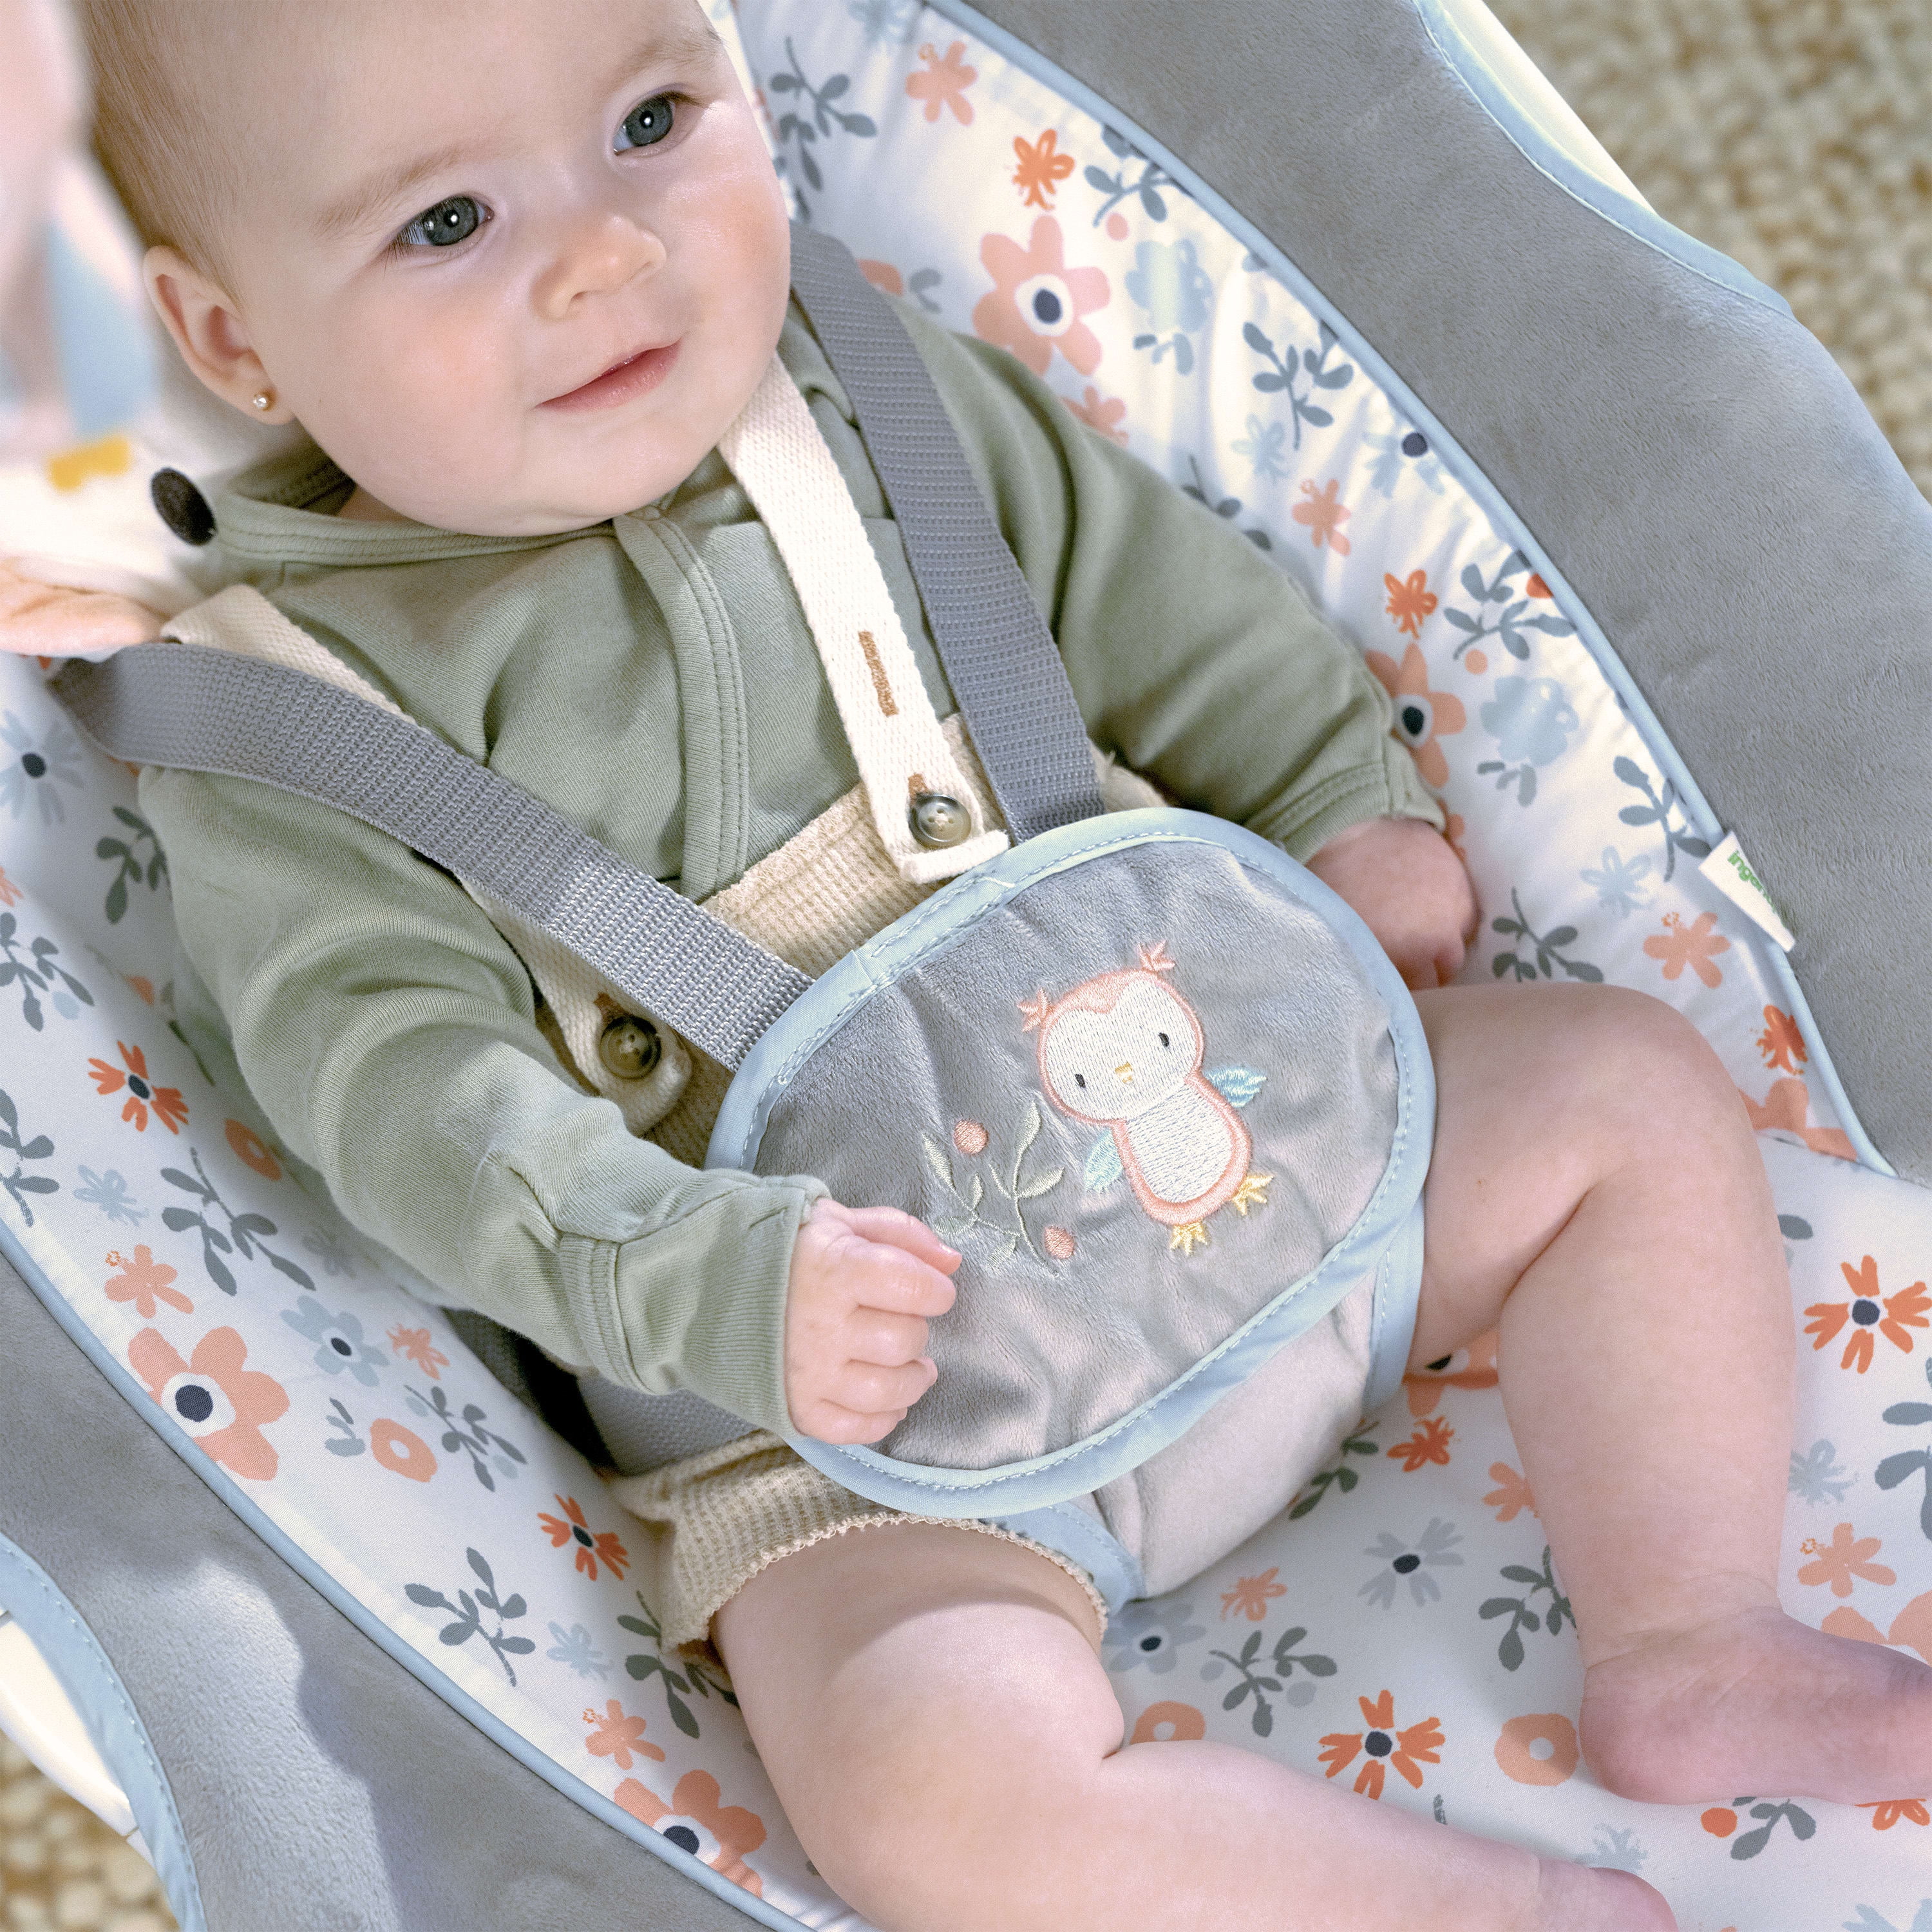 Ingenuity InLighten 5-Speed Baby Swing - Swivel Infant Seat, 5 Point Safety  Harness, Nature Sounds, Lights - Nally Owl